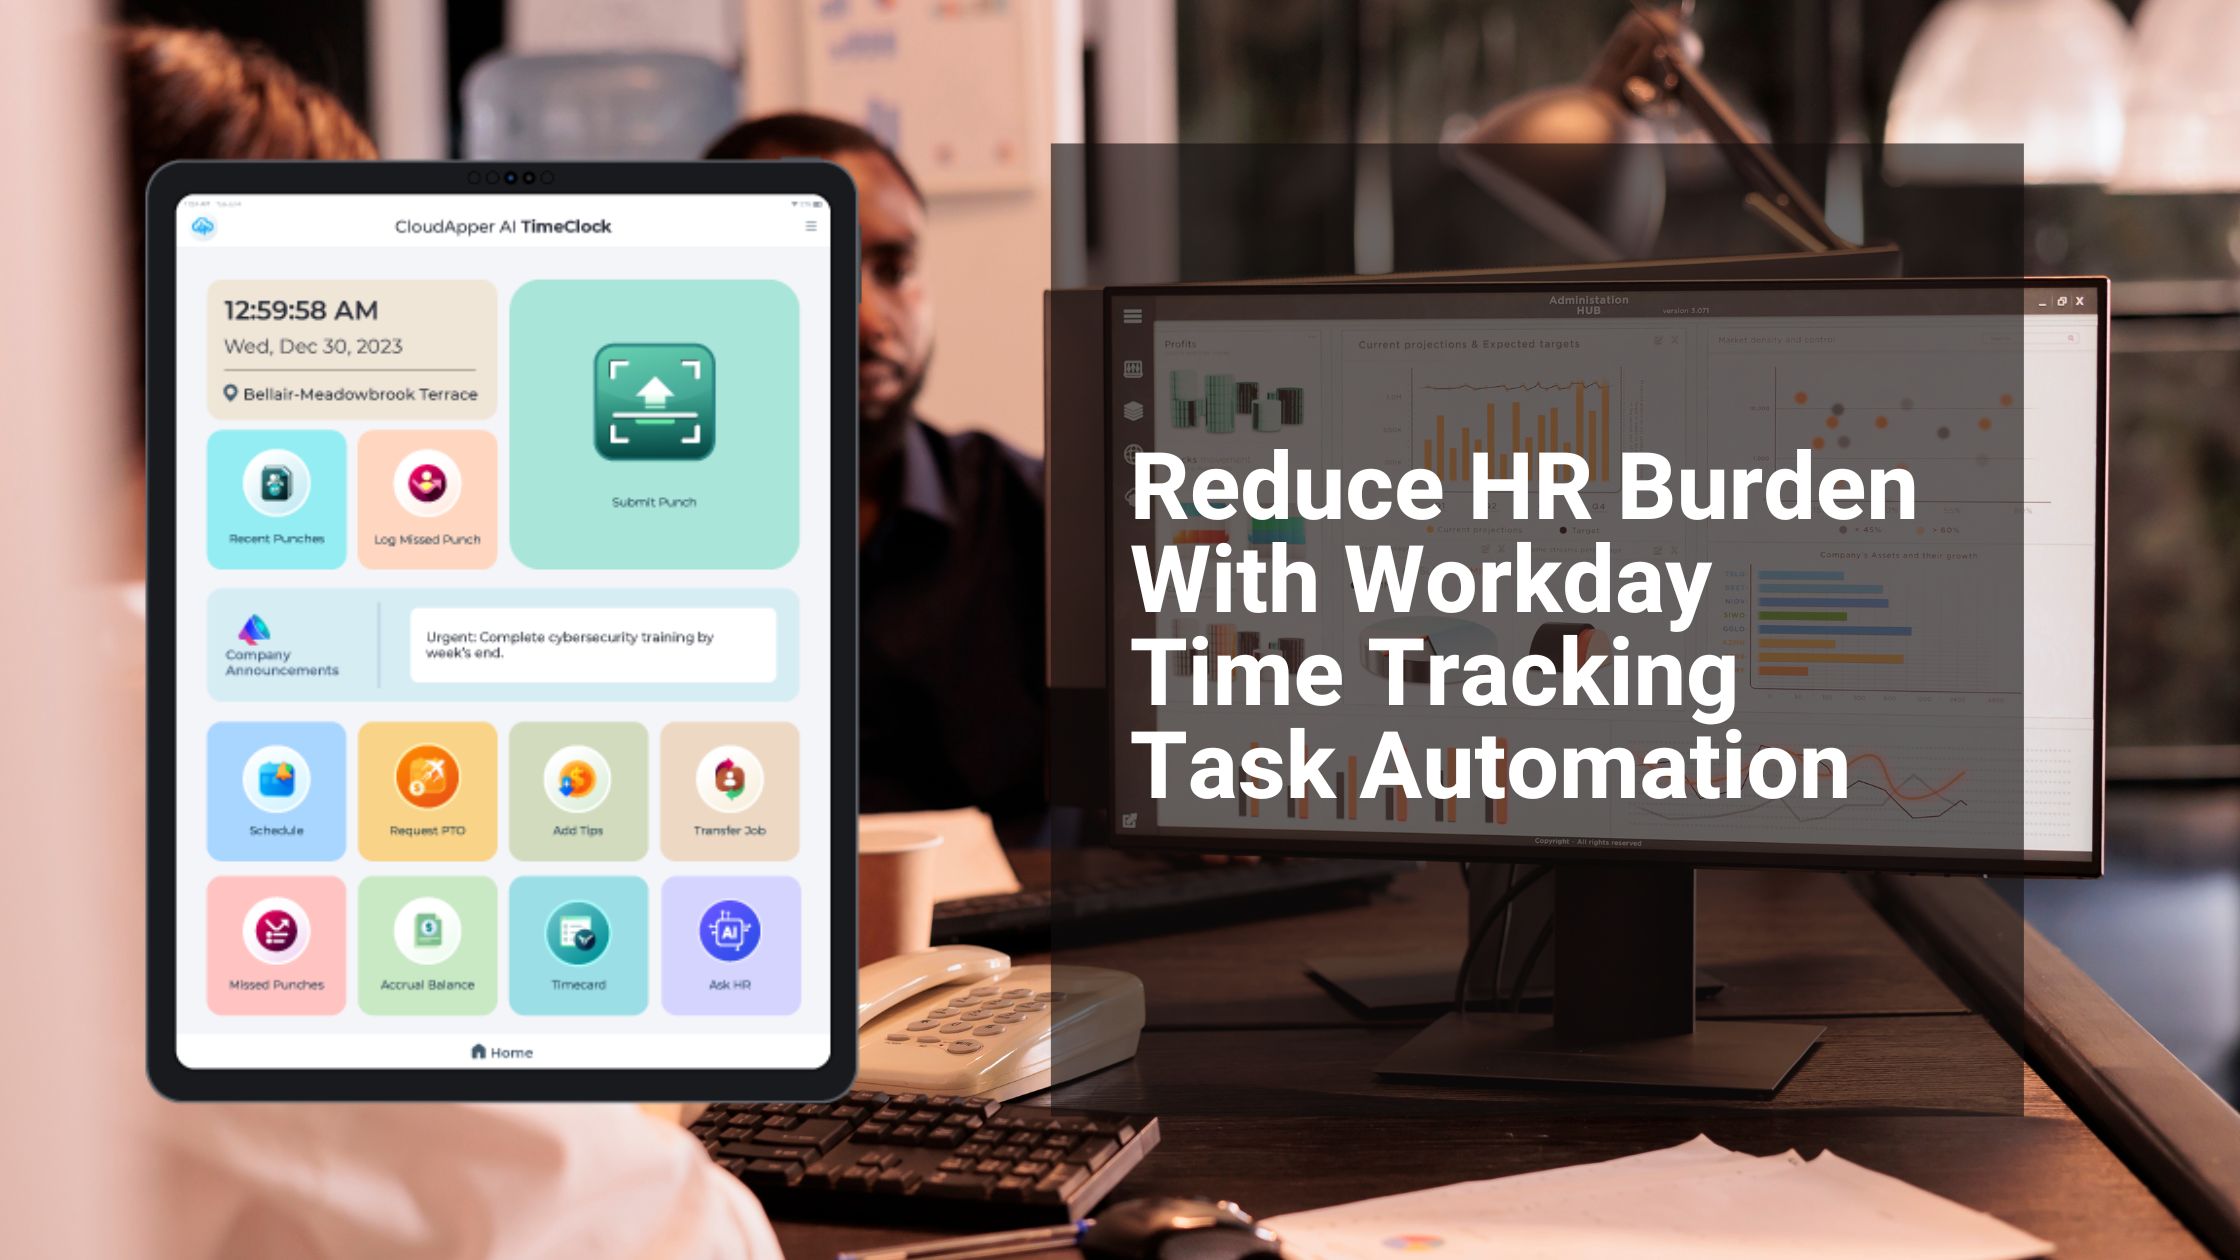 Reduce HR Burden With Workday Time Tracking Task Automation